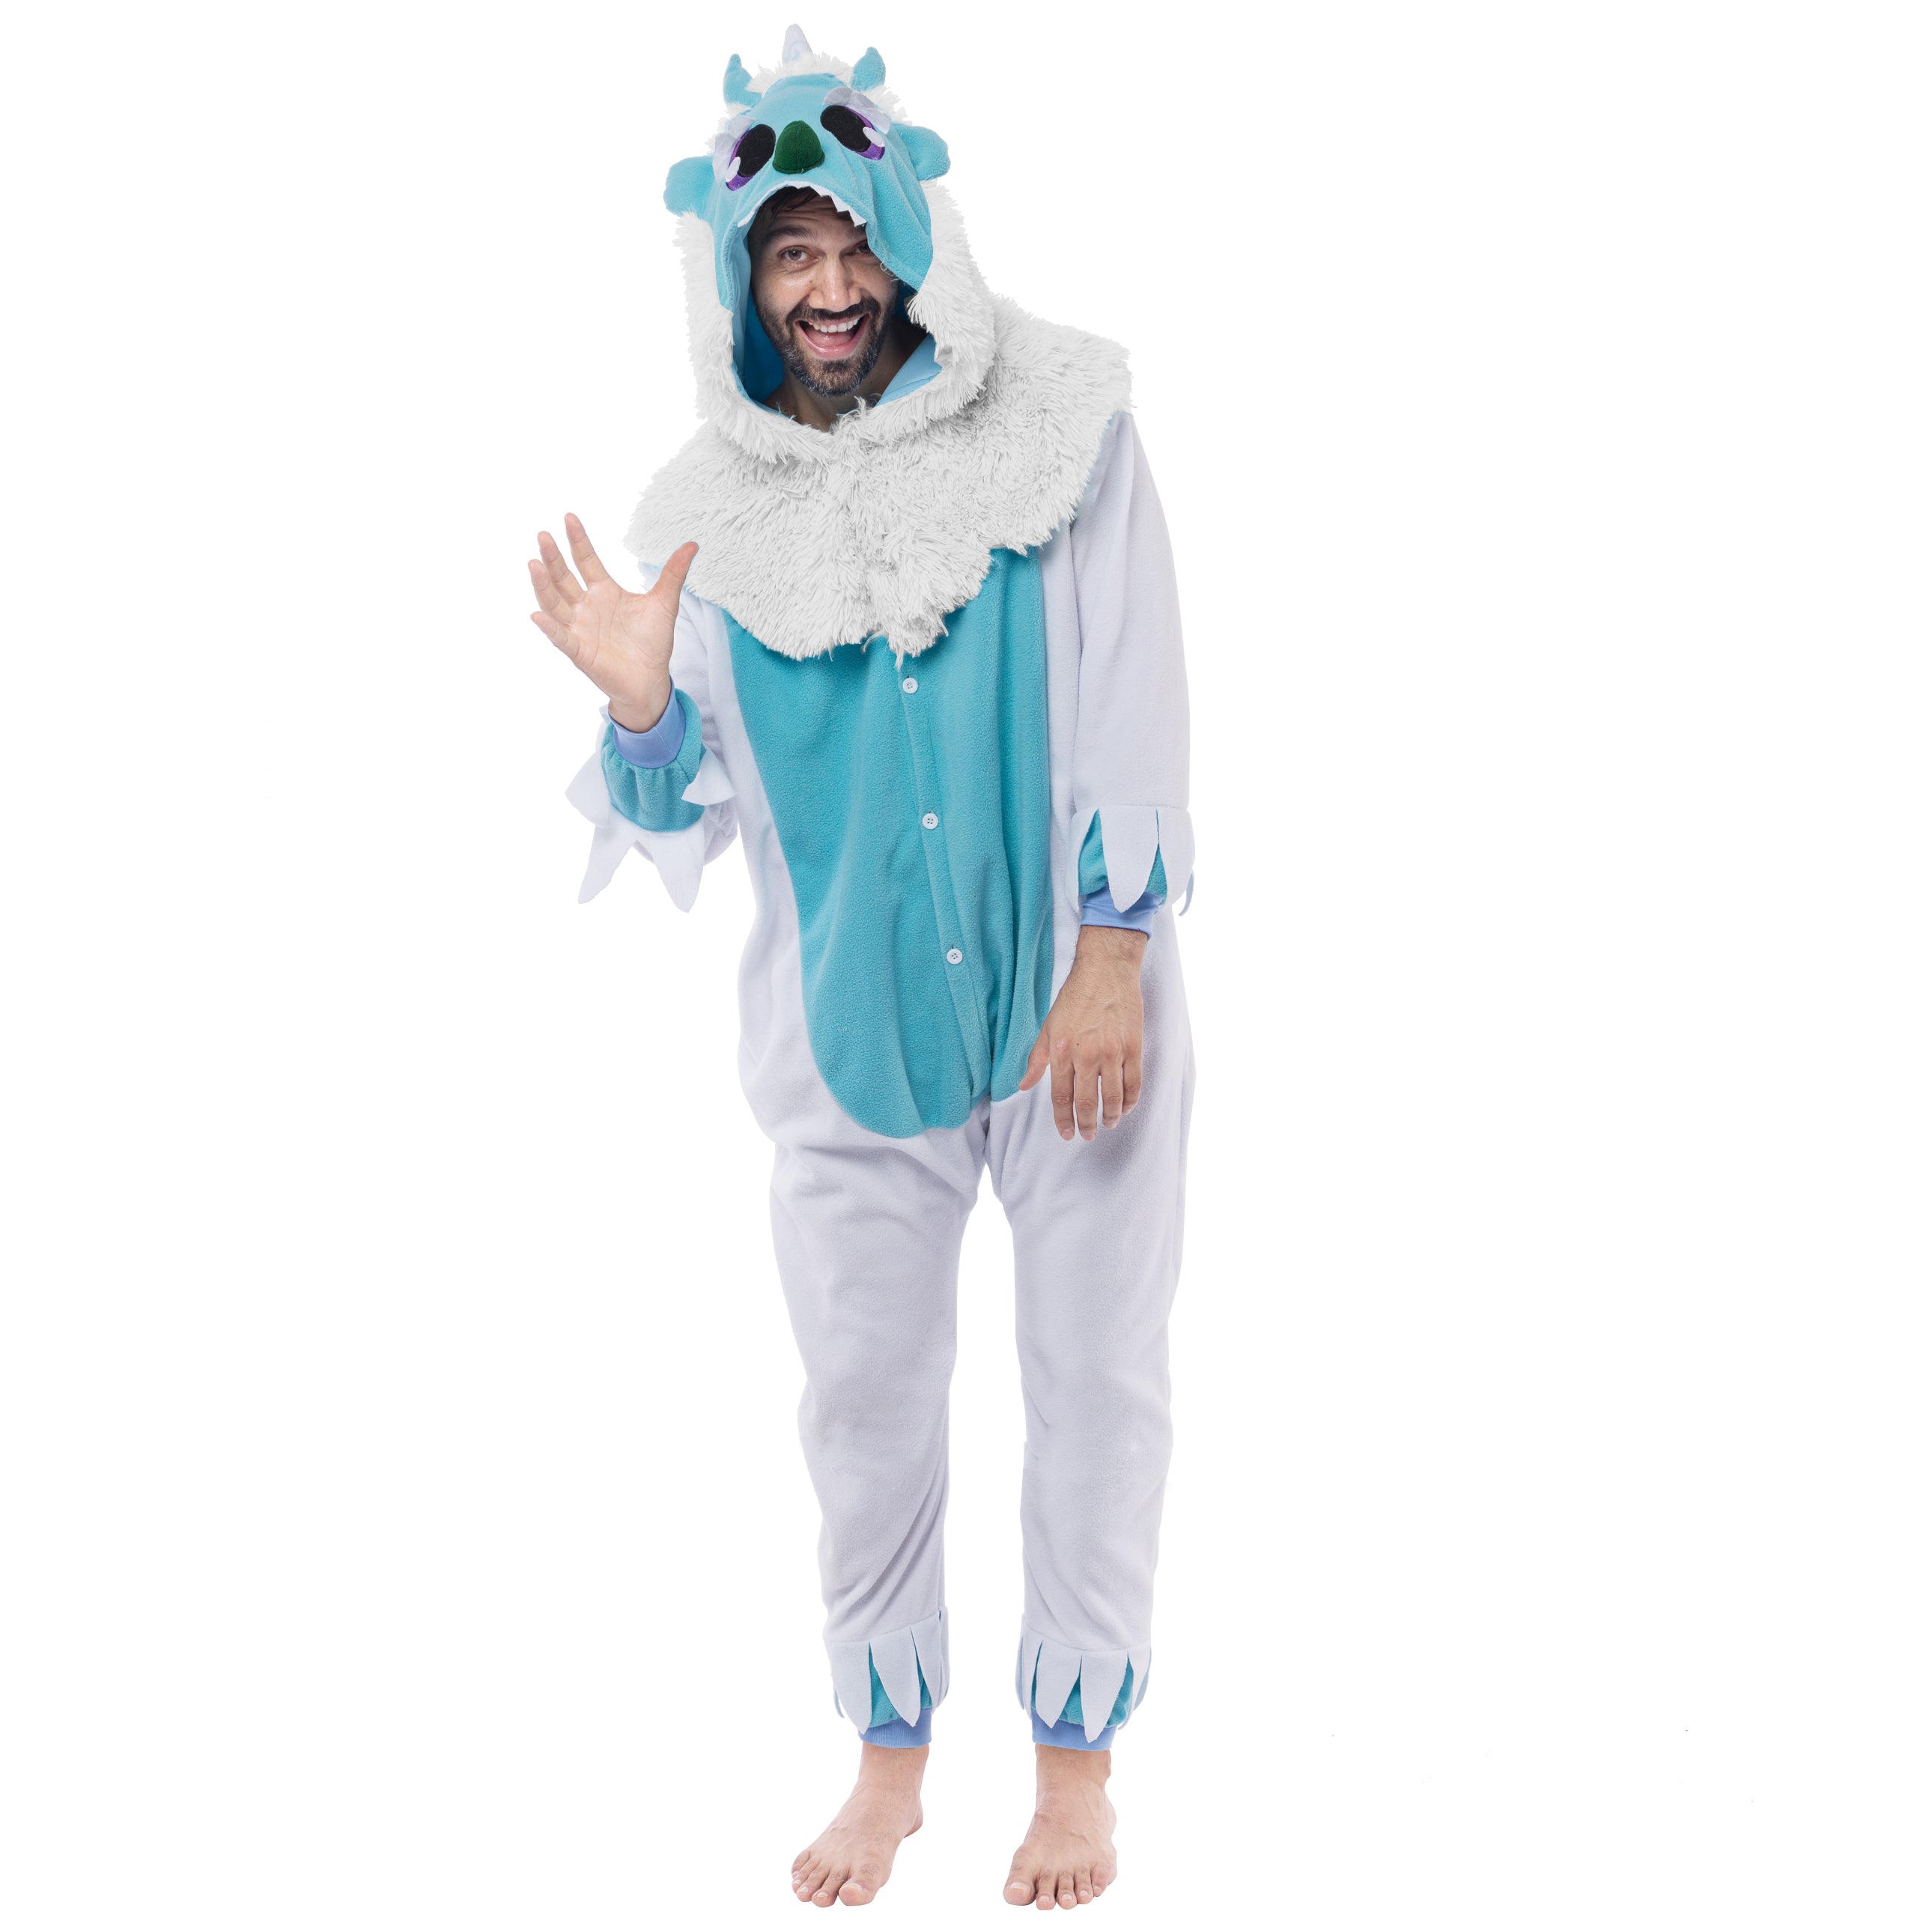 Yeti Costume for Boys. Express delivery